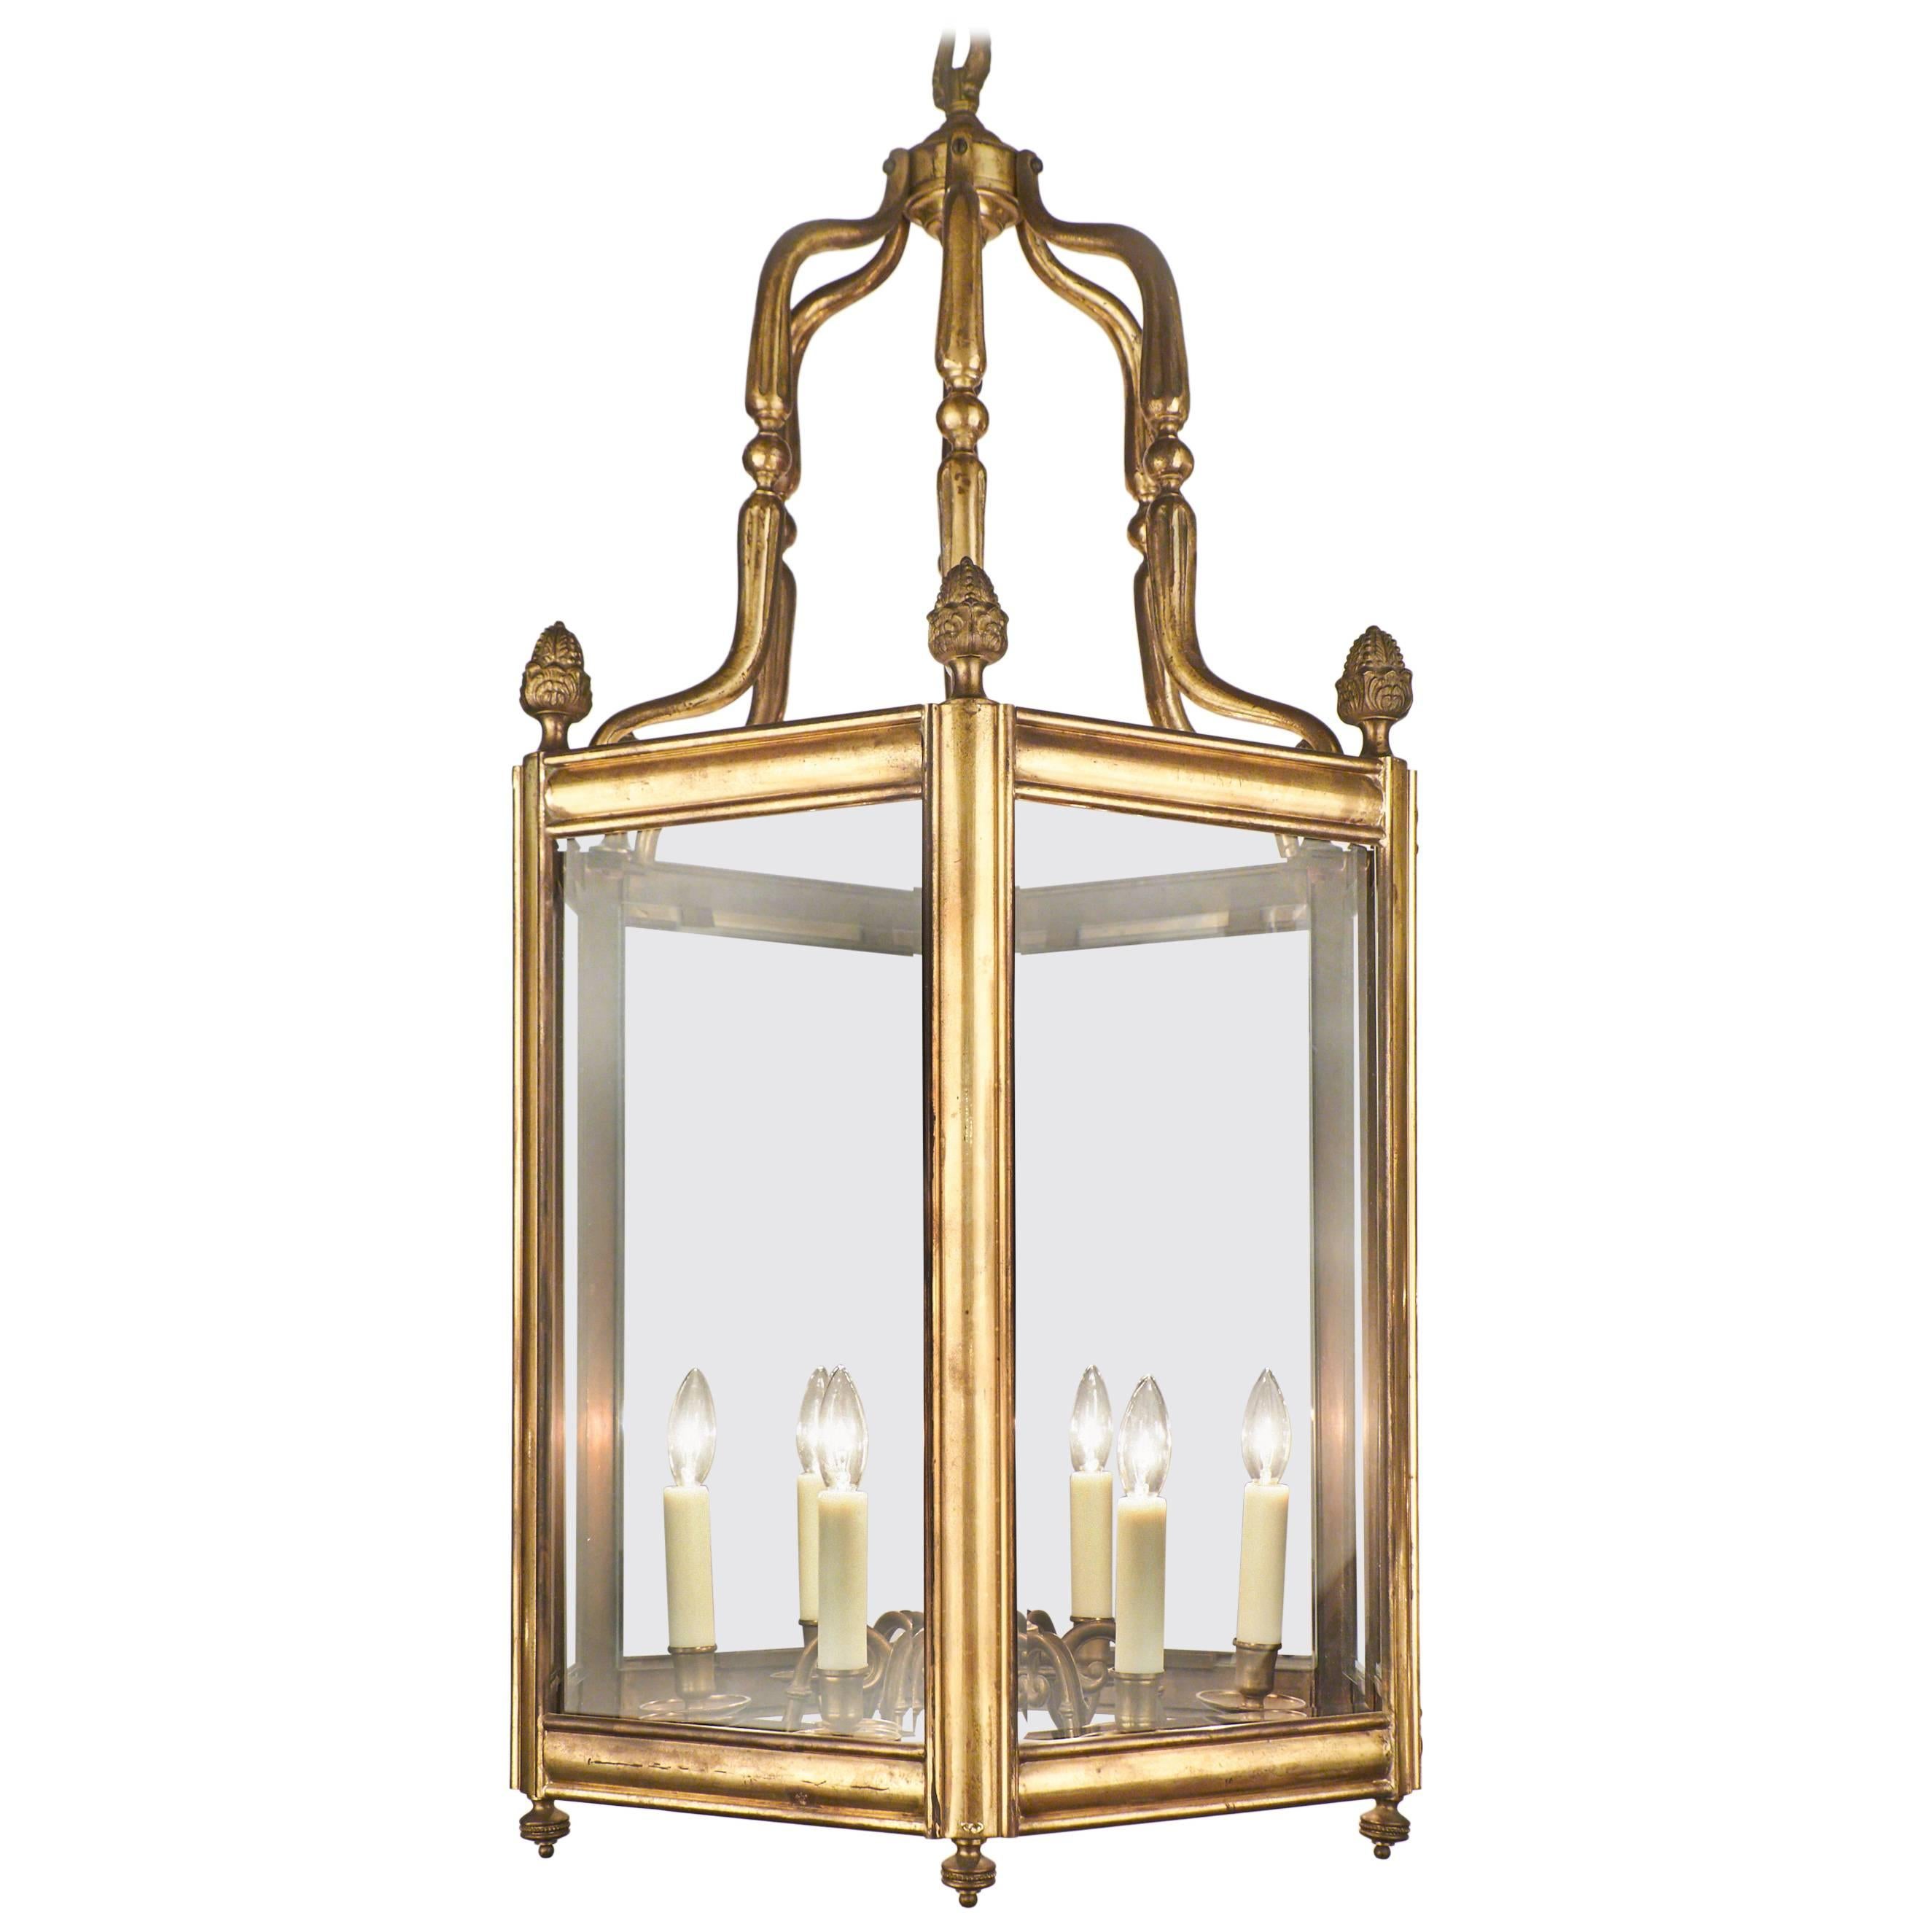 Antique French Louis XVI Style Lantern in Solid Brass